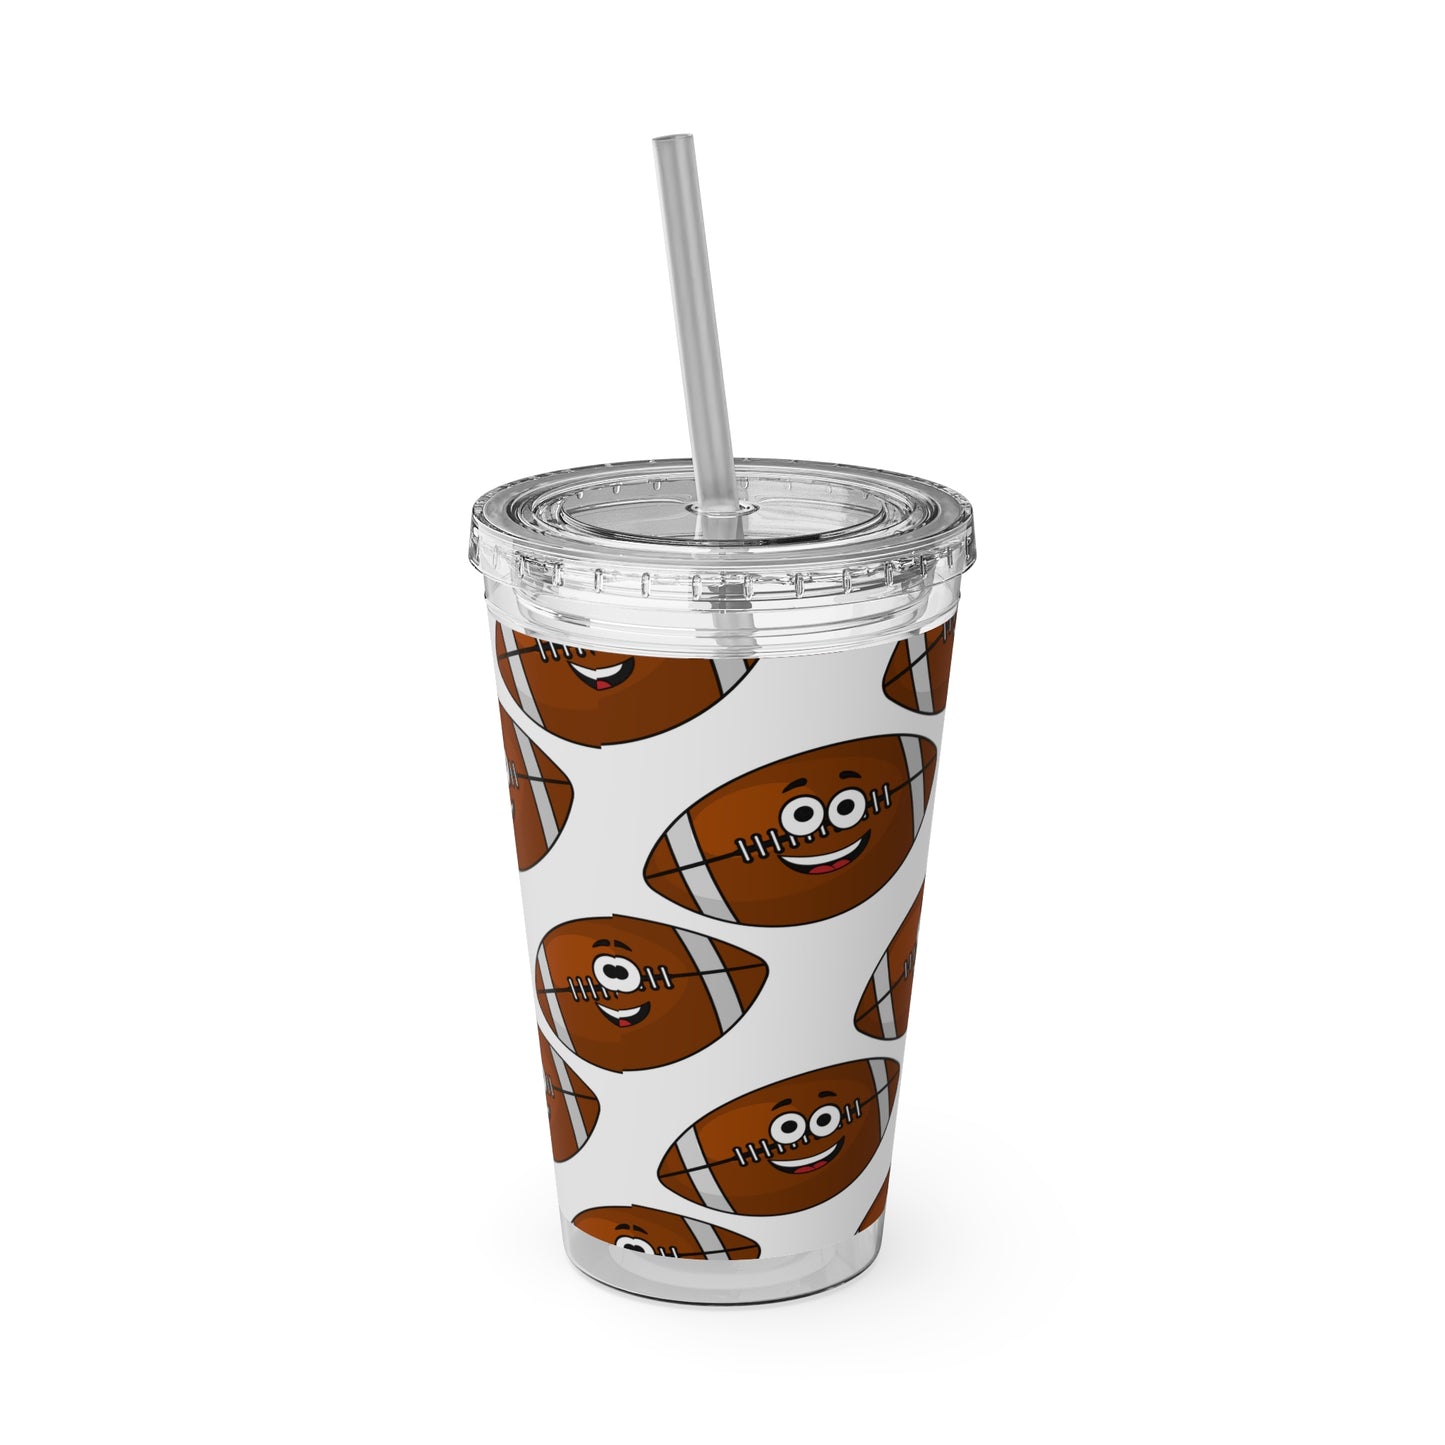 Replace with: Printify Football Fan Tumbler cup with a straw